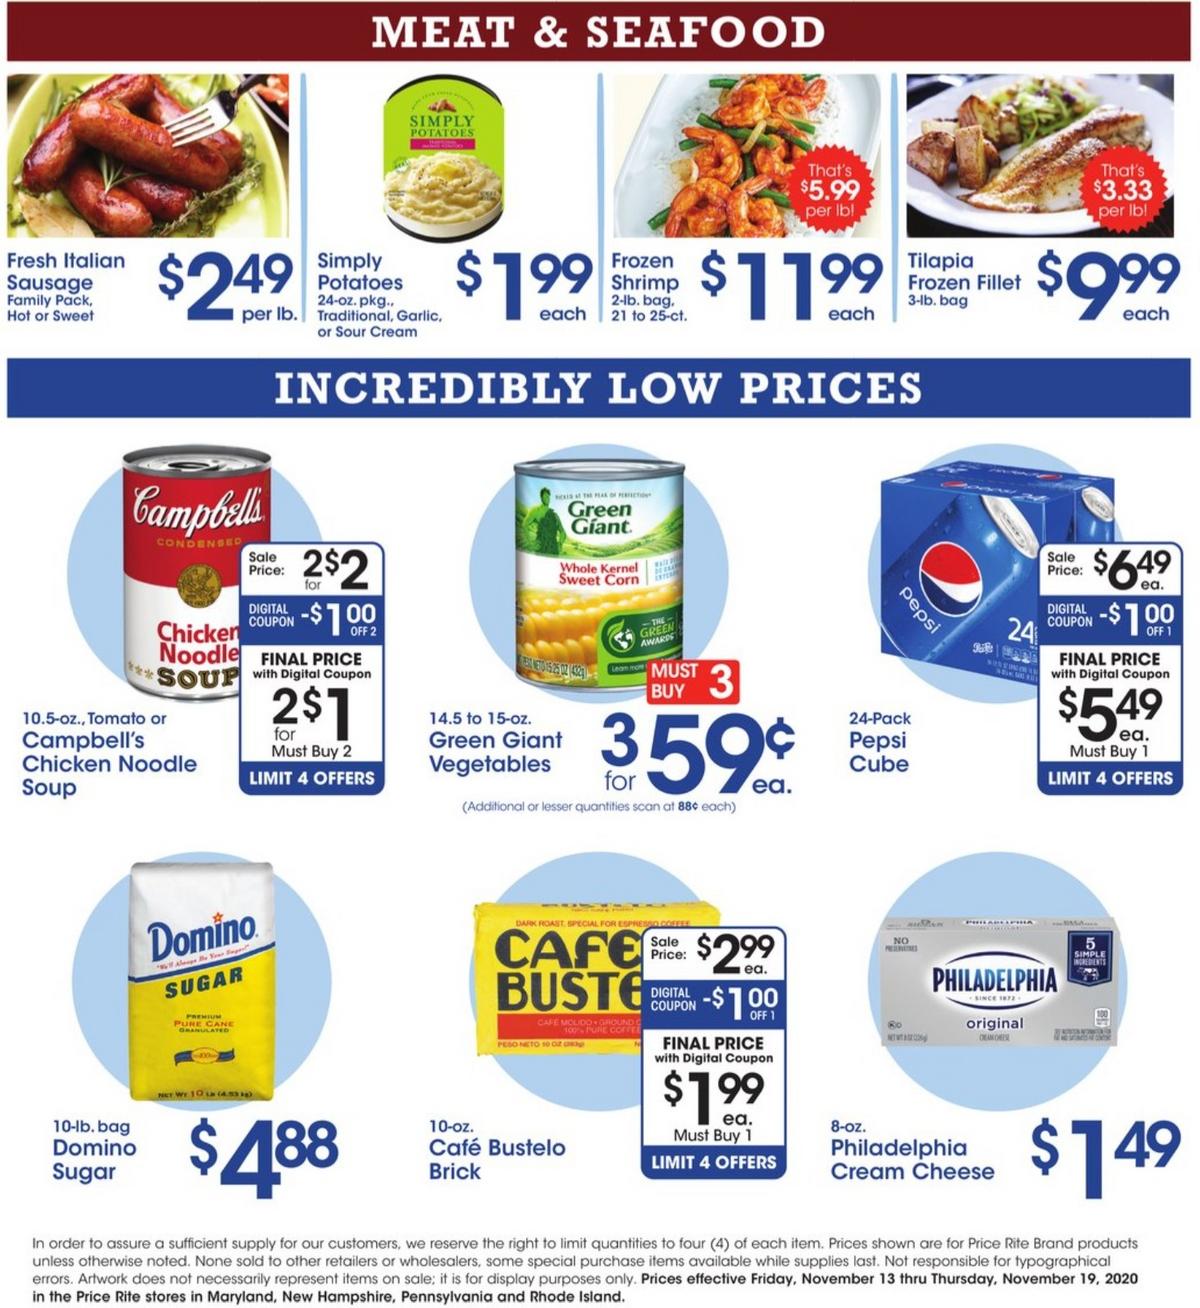 Price Rite Weekly Ad from November 13